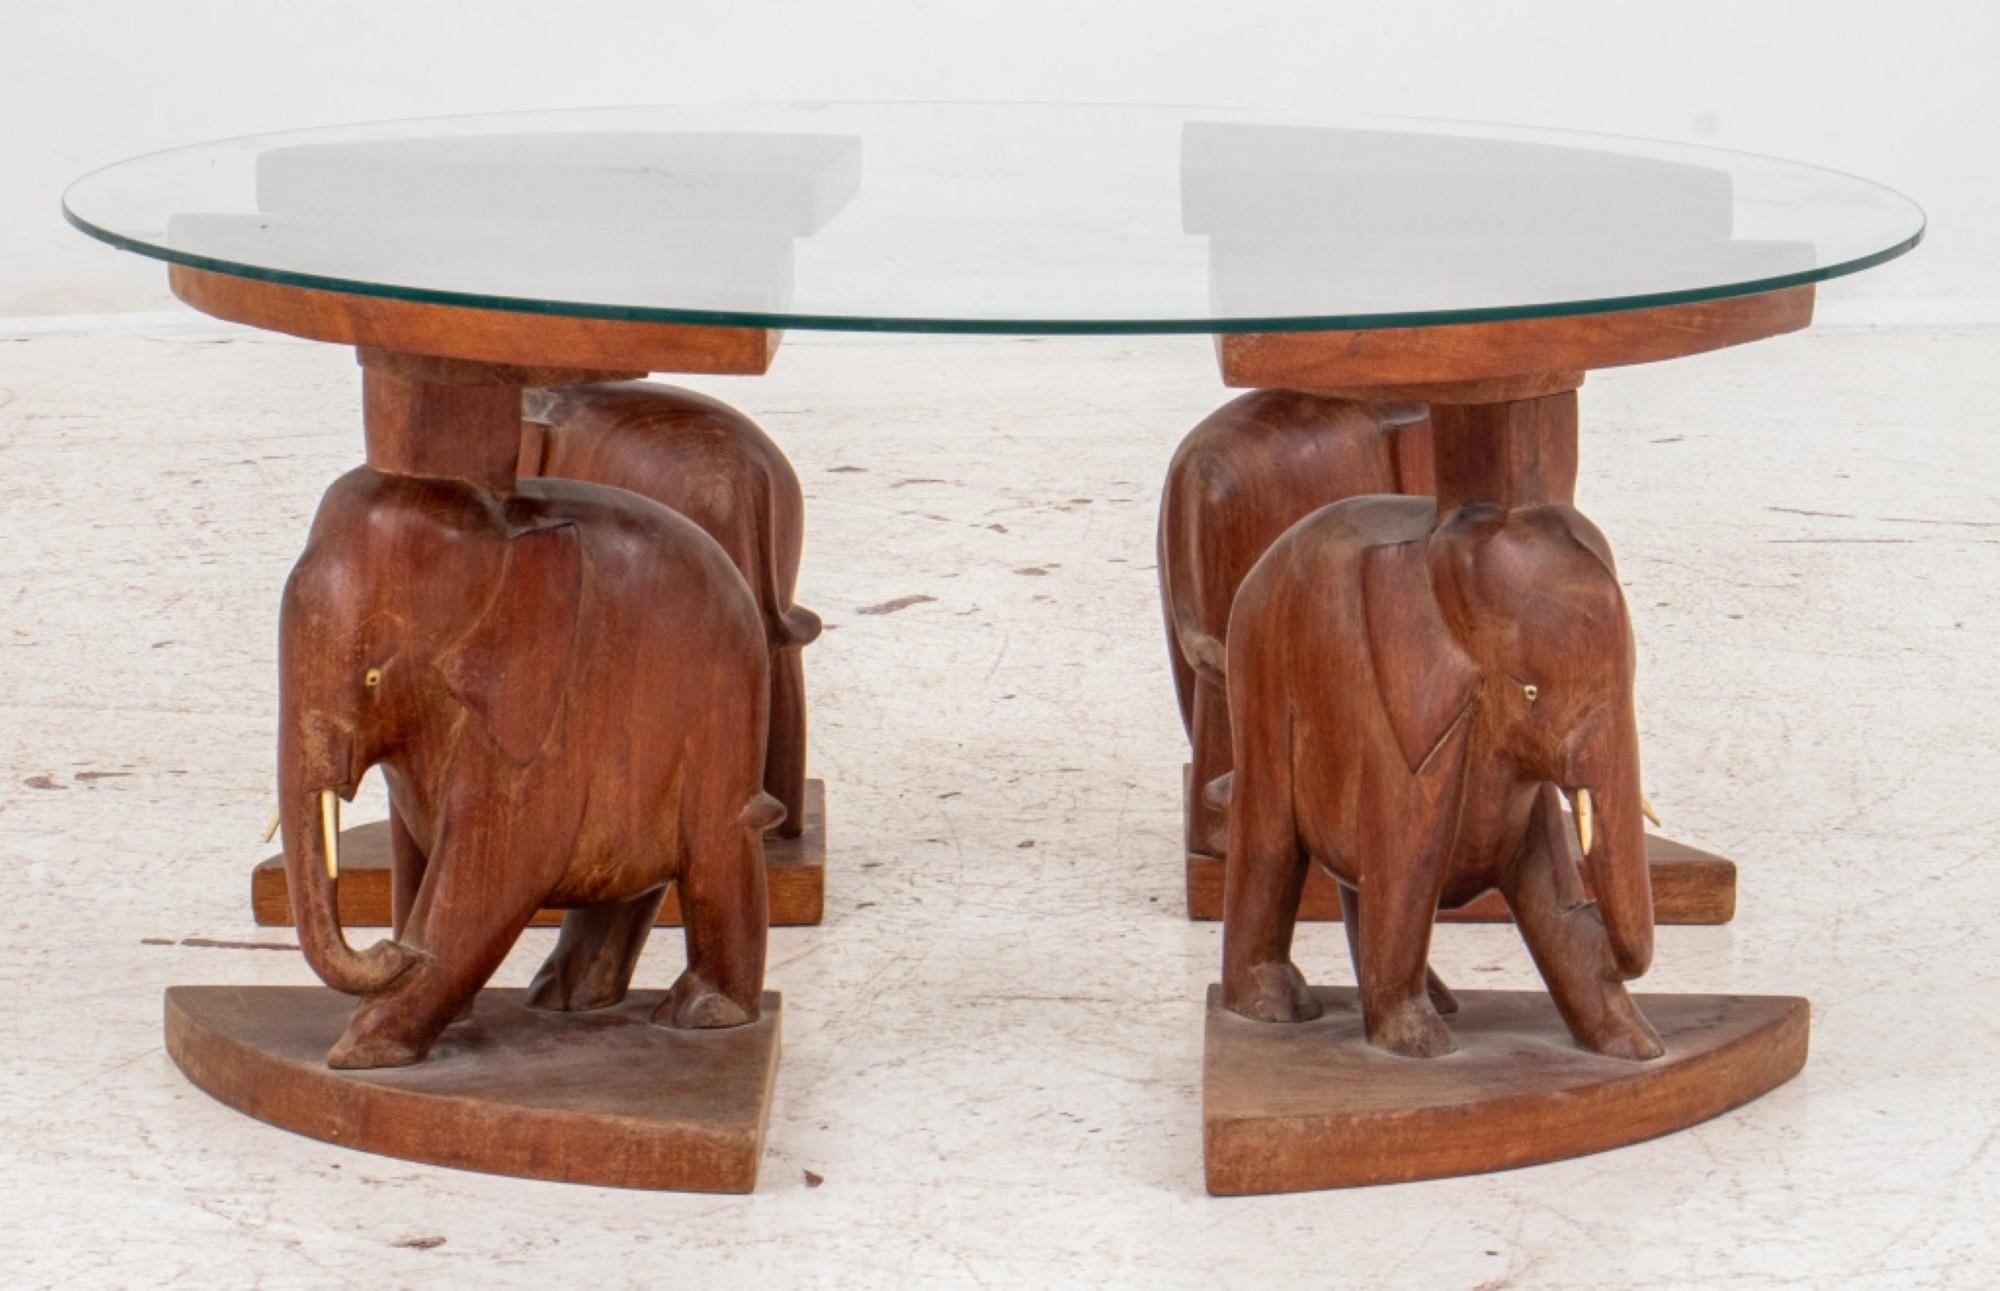 The African coffee table features four elephant-carved wood legs and a round glass top. Its dimensions are approximately 14 inches in height and 30 inches in diameter.




